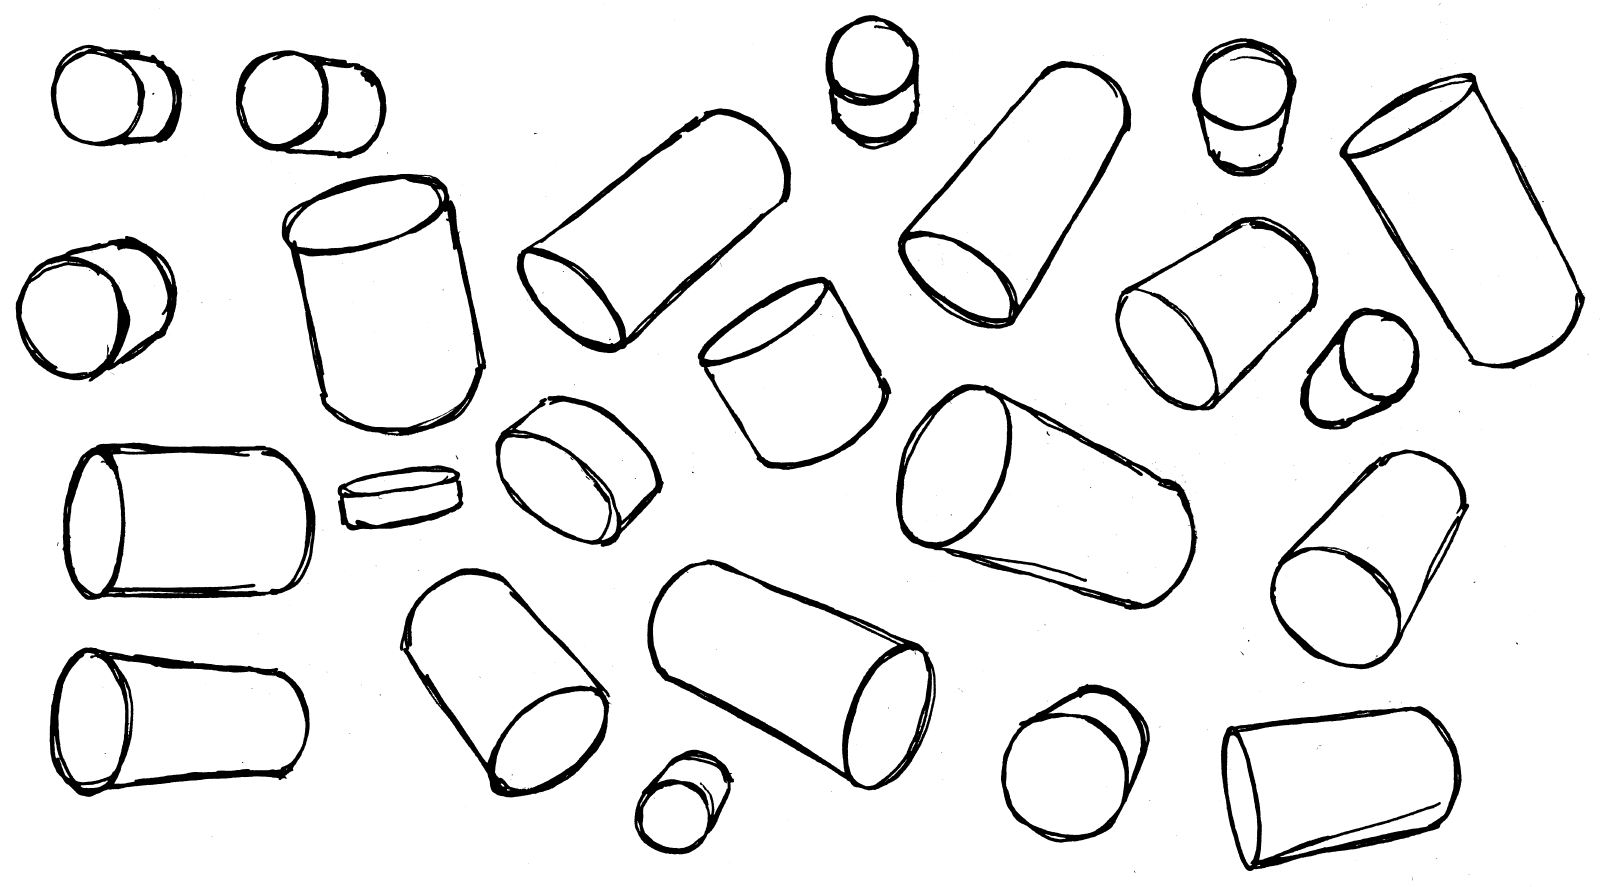 image of drawn cylinders